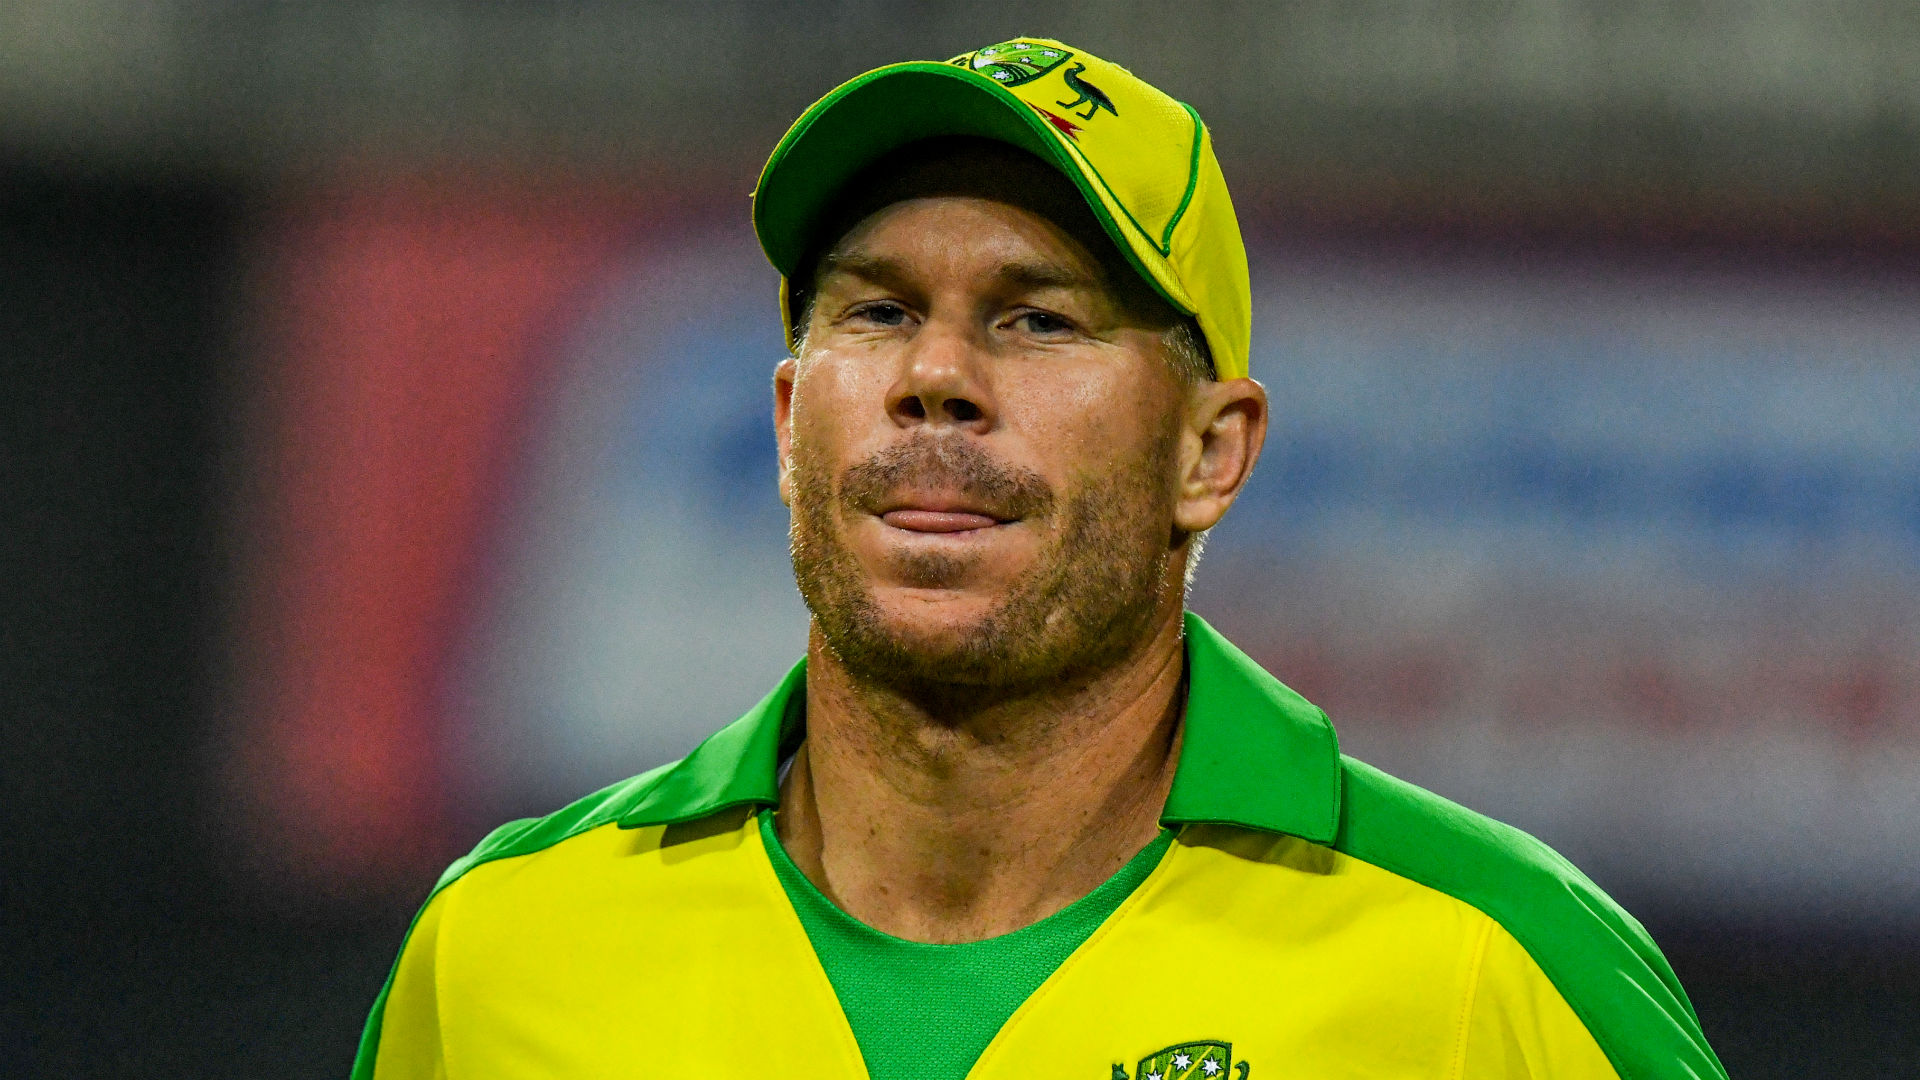 David Warner has replaced Kane Williamson as captain of Sunrisers Hyderabad for the upcoming Indian Premier League campaign.